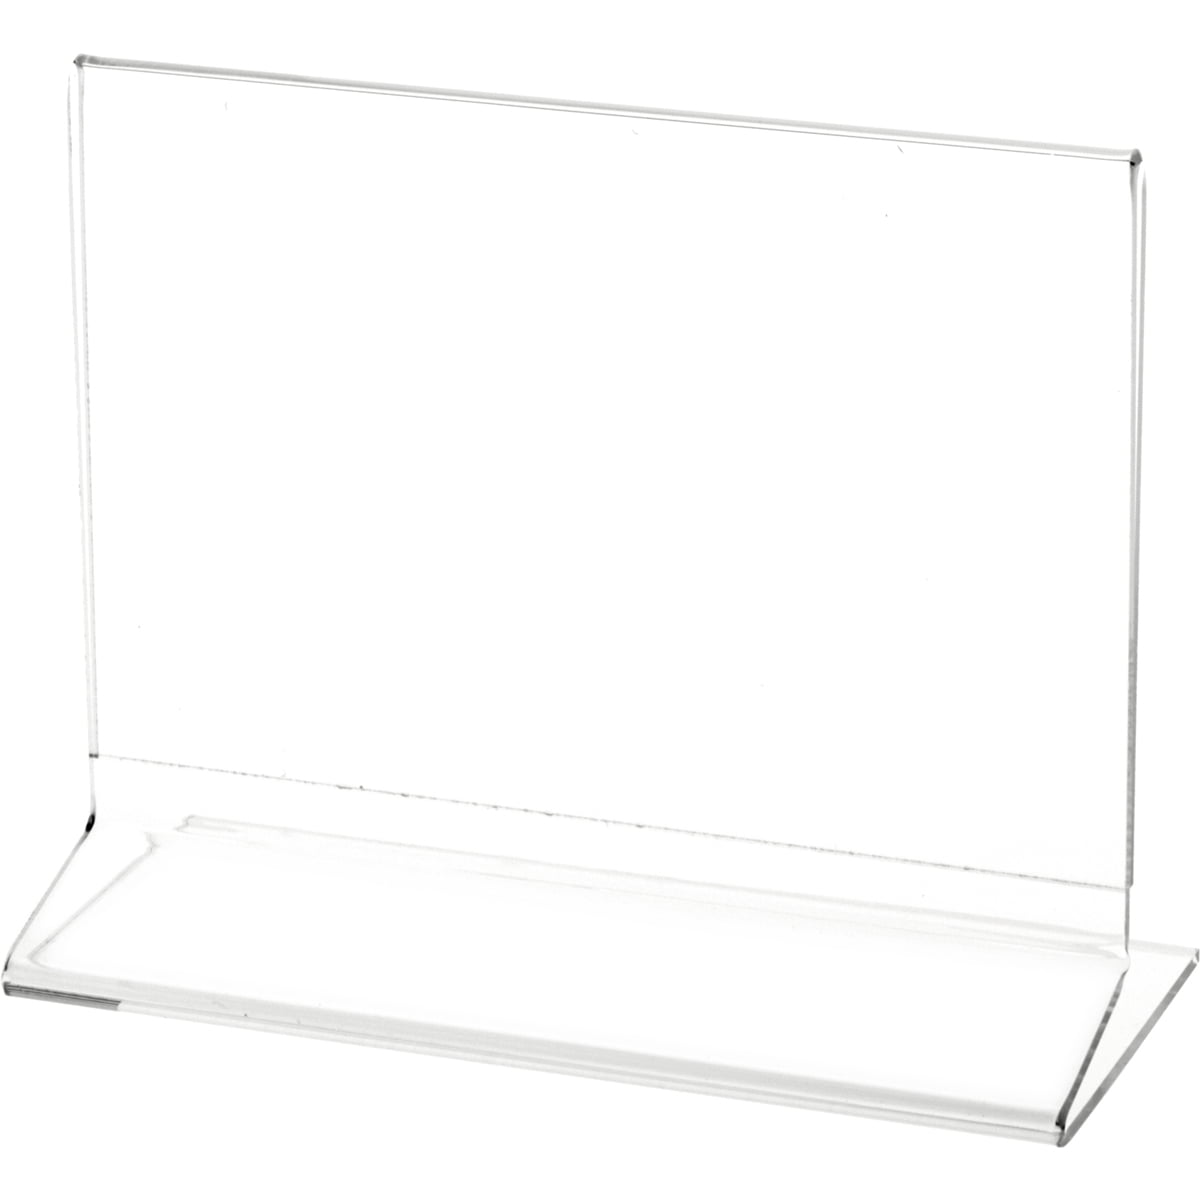 Plymor Clear Acrylic Sign Display / Literature Holder Angled 5" W x 3.5" H 